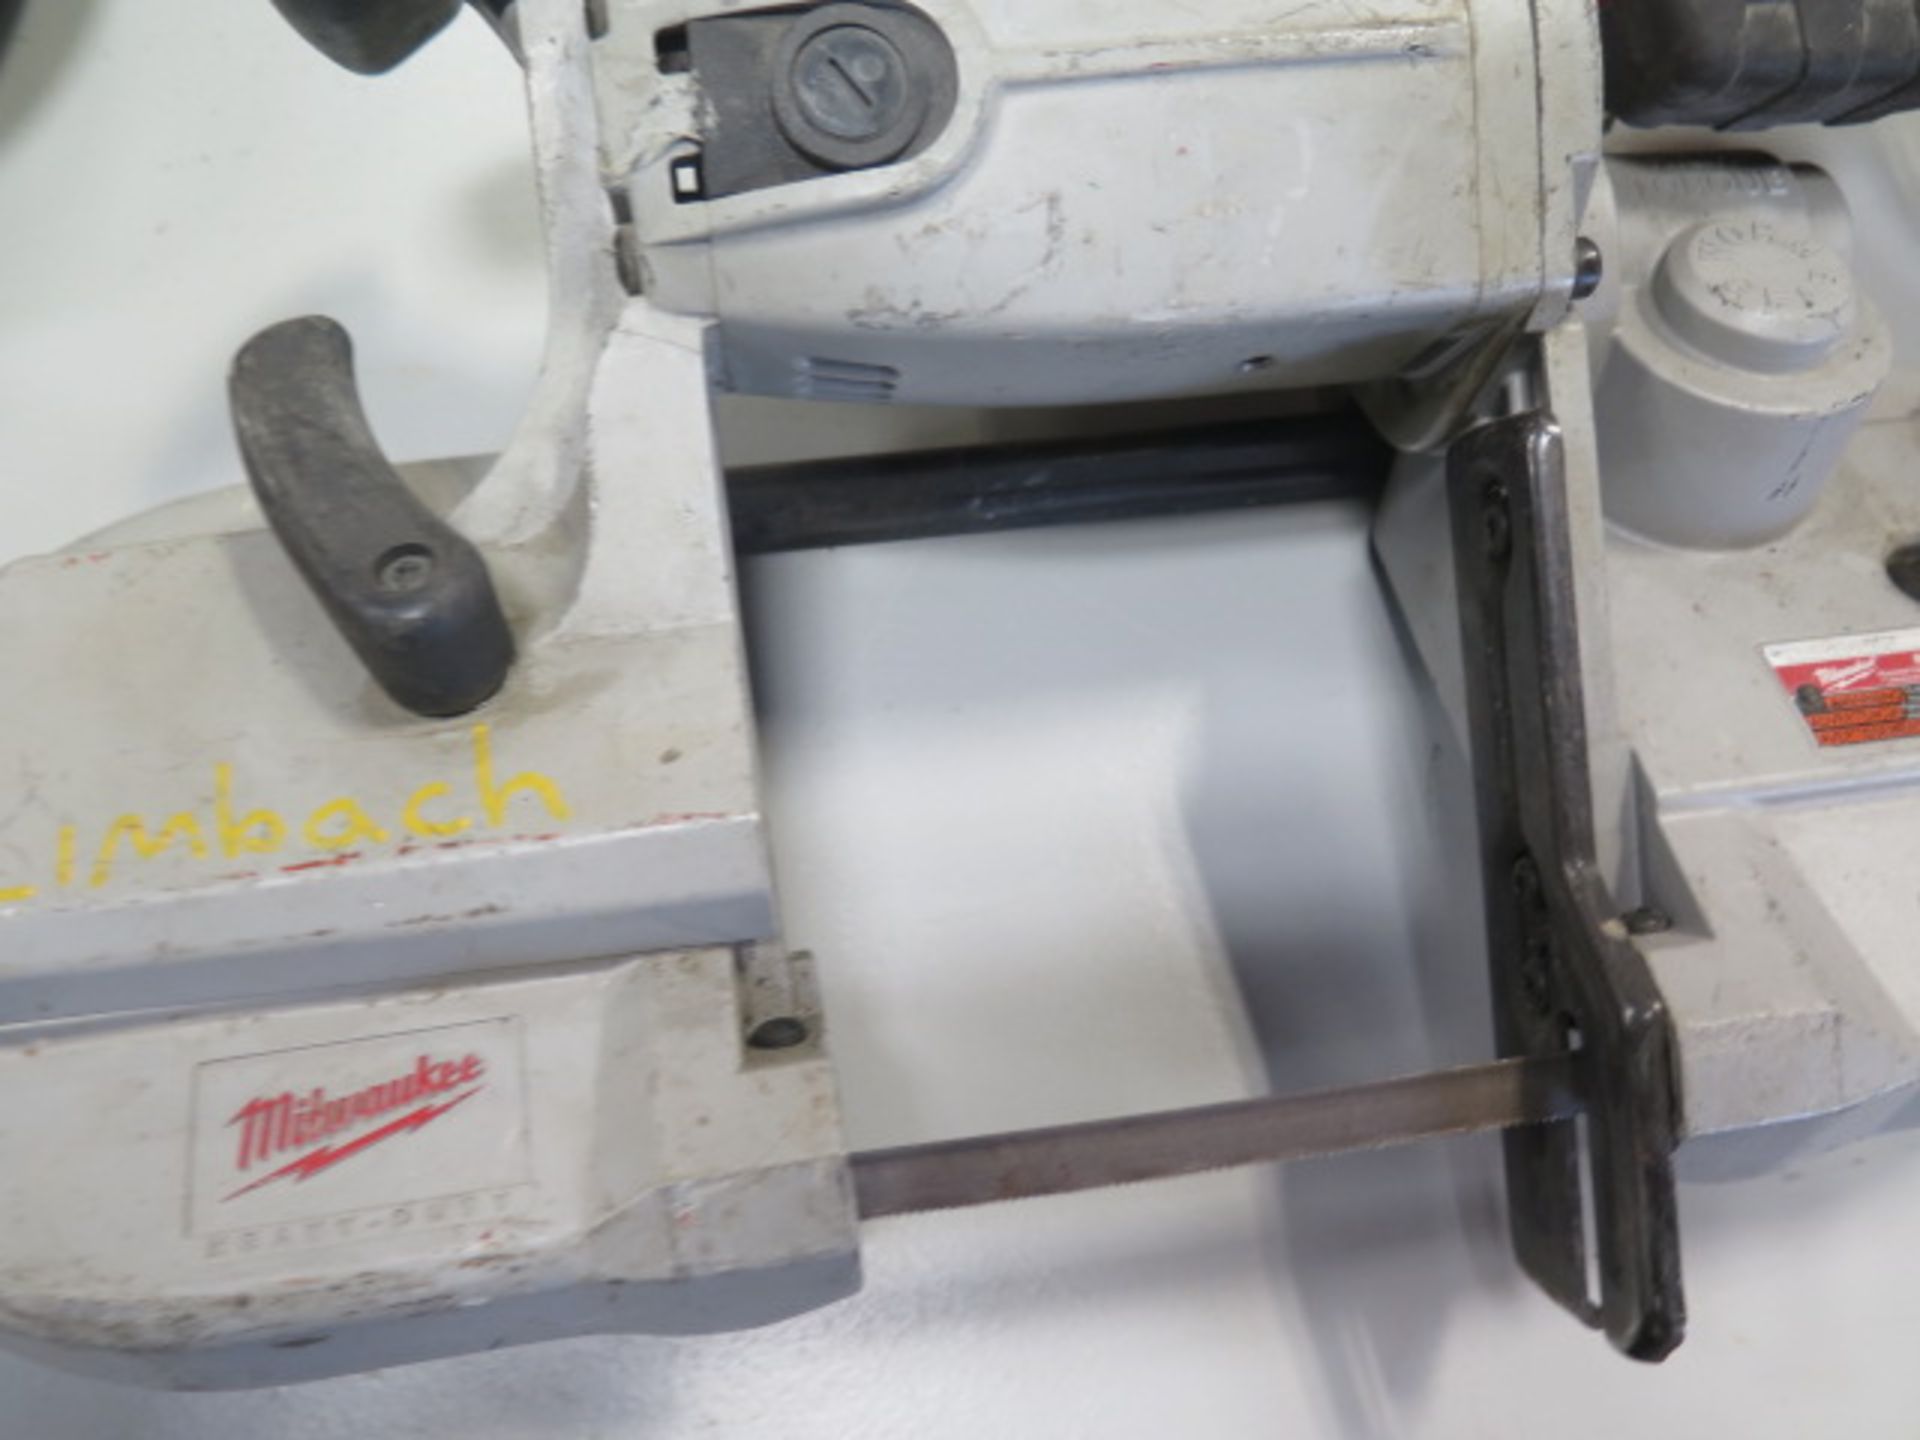 Milwaukee 18 Volt Deep Cut Portable Band Saw (SOLD AS-IS - NO WARRANTY) - Image 3 of 5